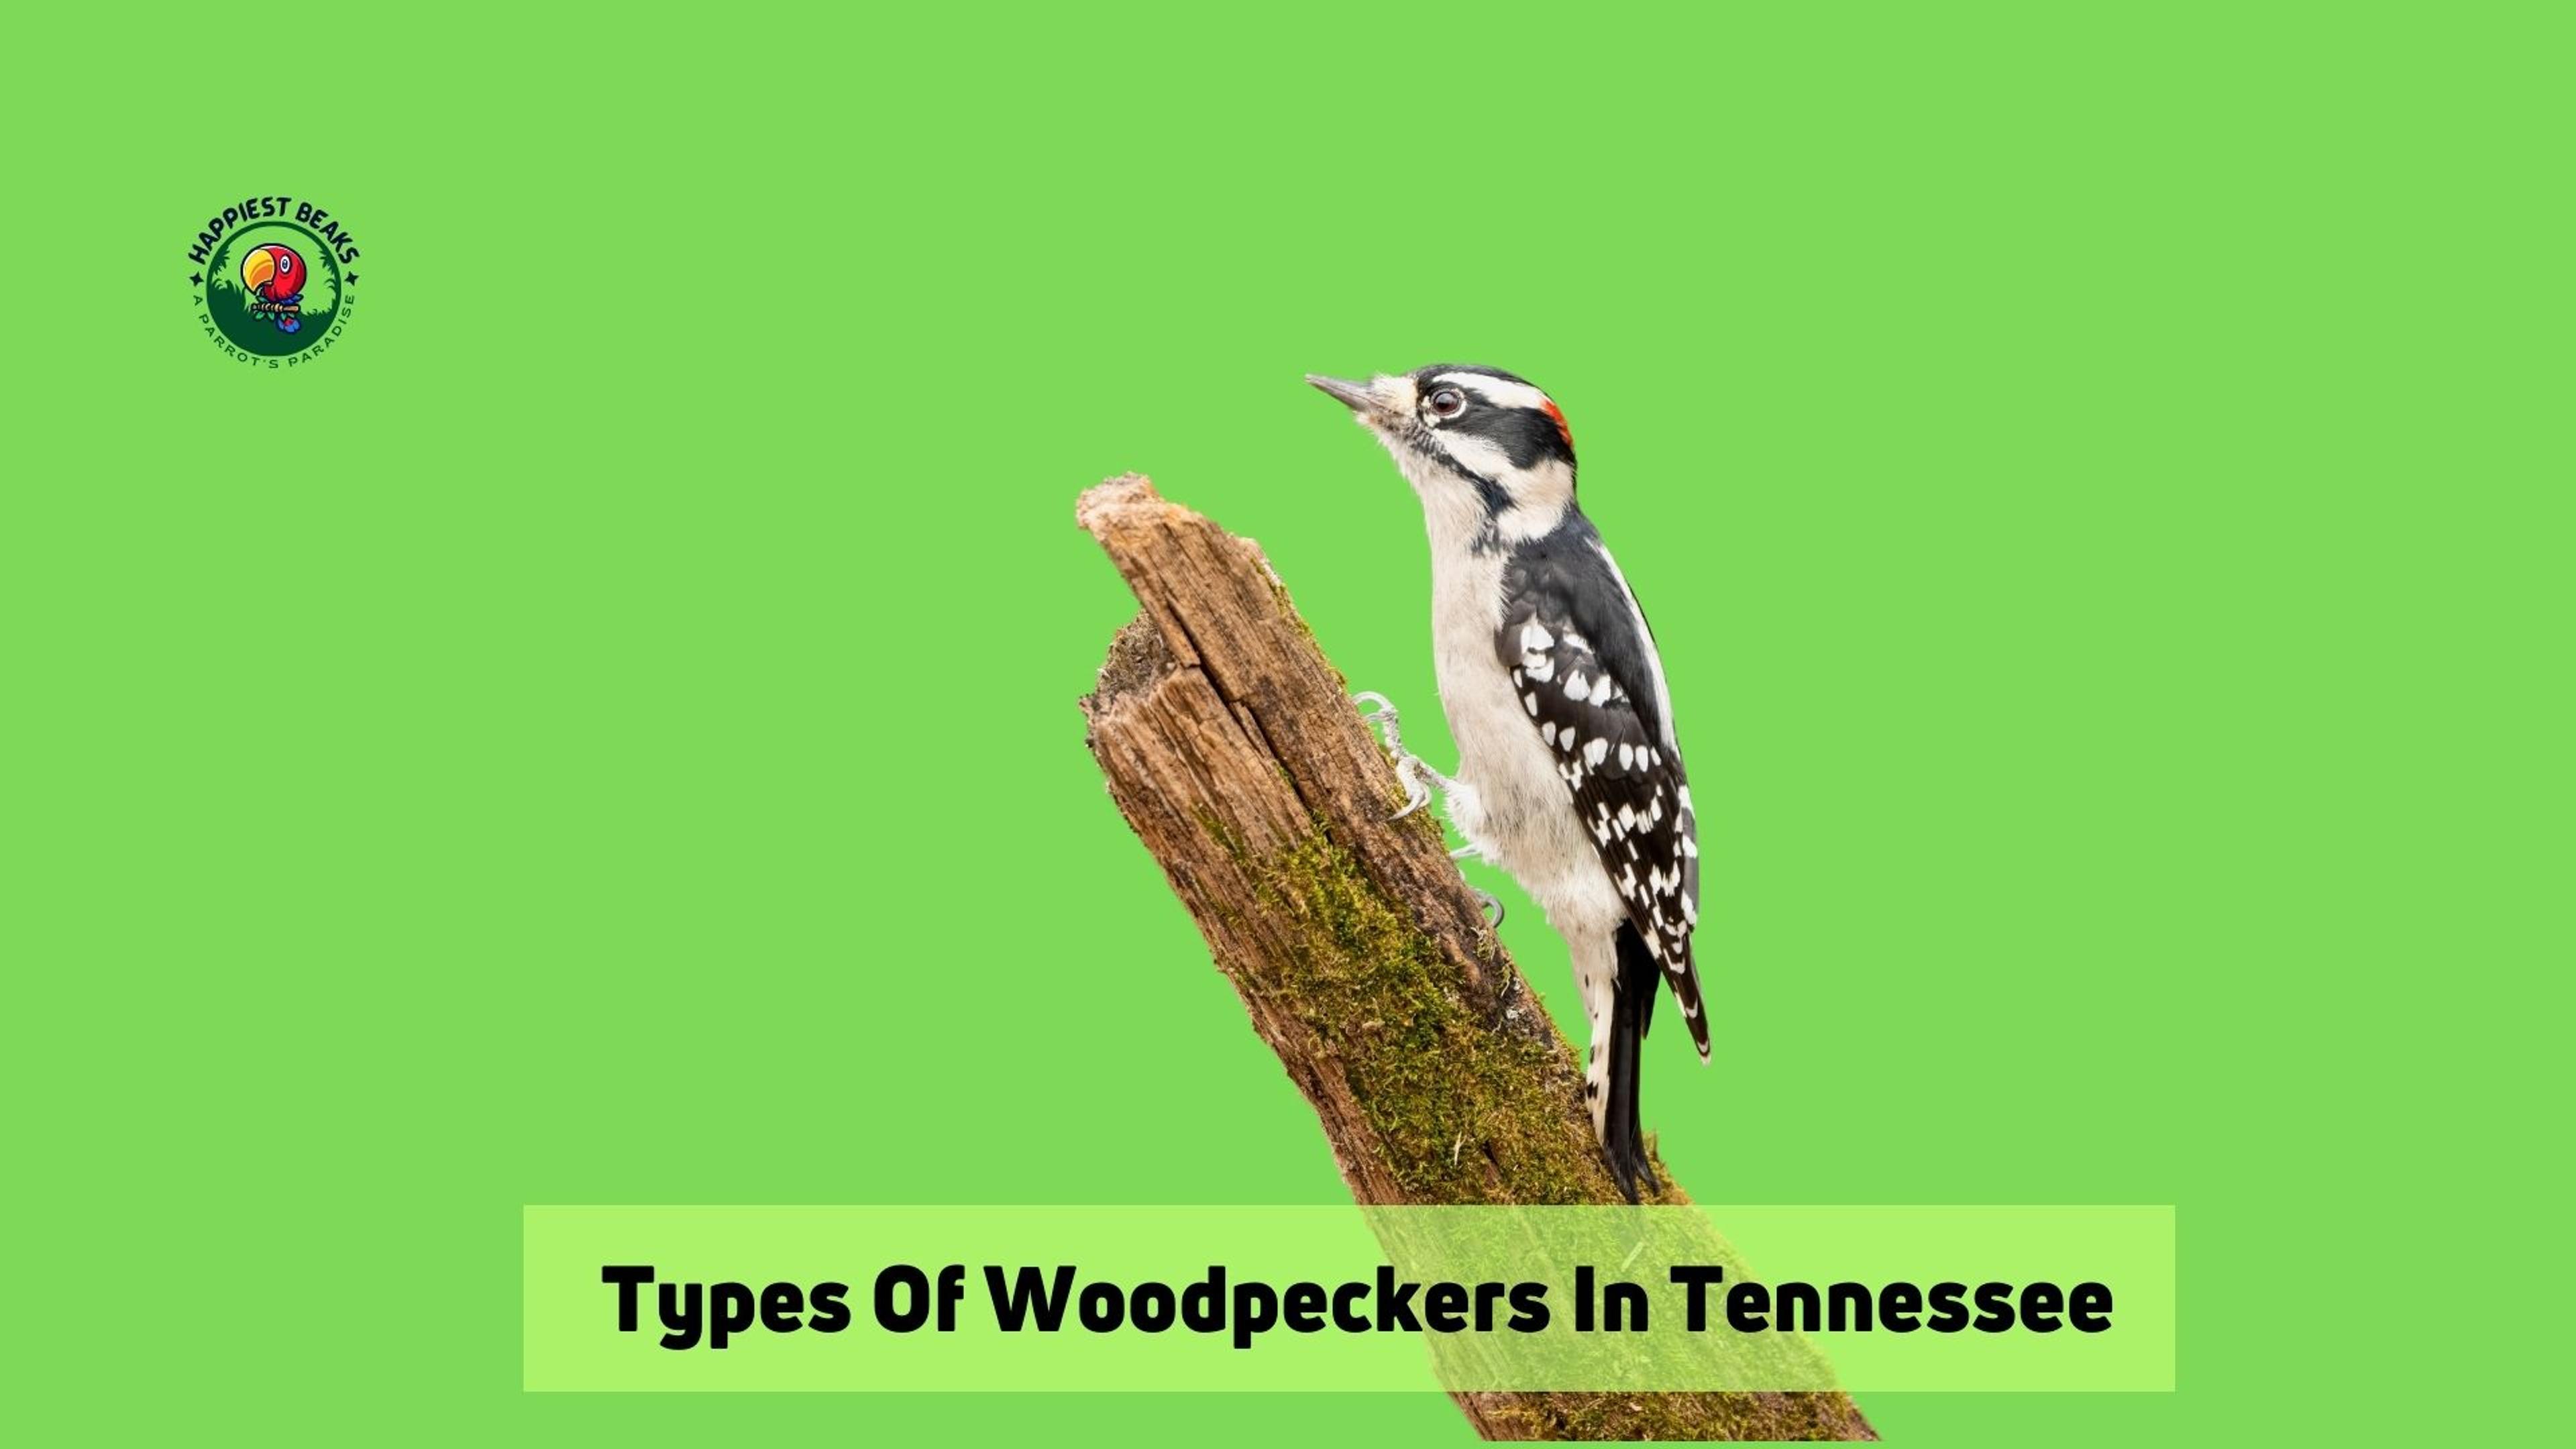 Types of Woodpeckers in Tennessee